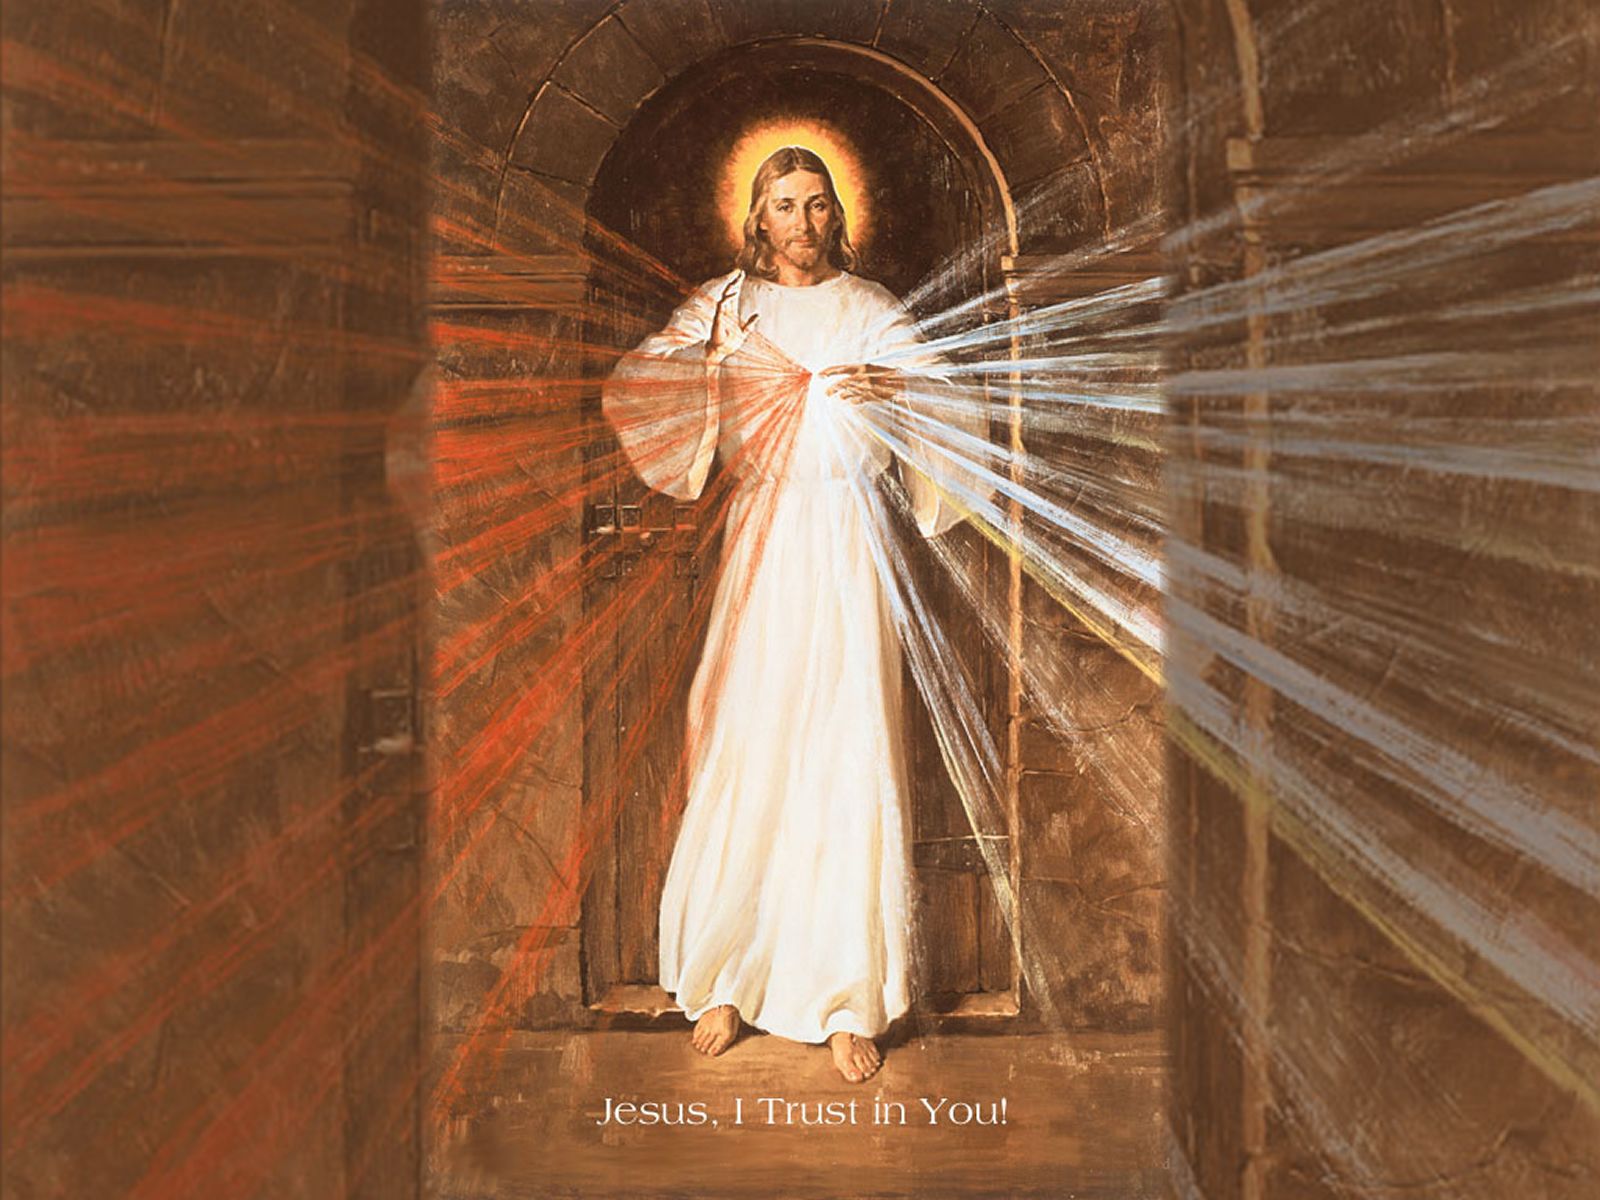 Download the Skemp Divine Mercy Image Wallpaper. The Divine Mercy